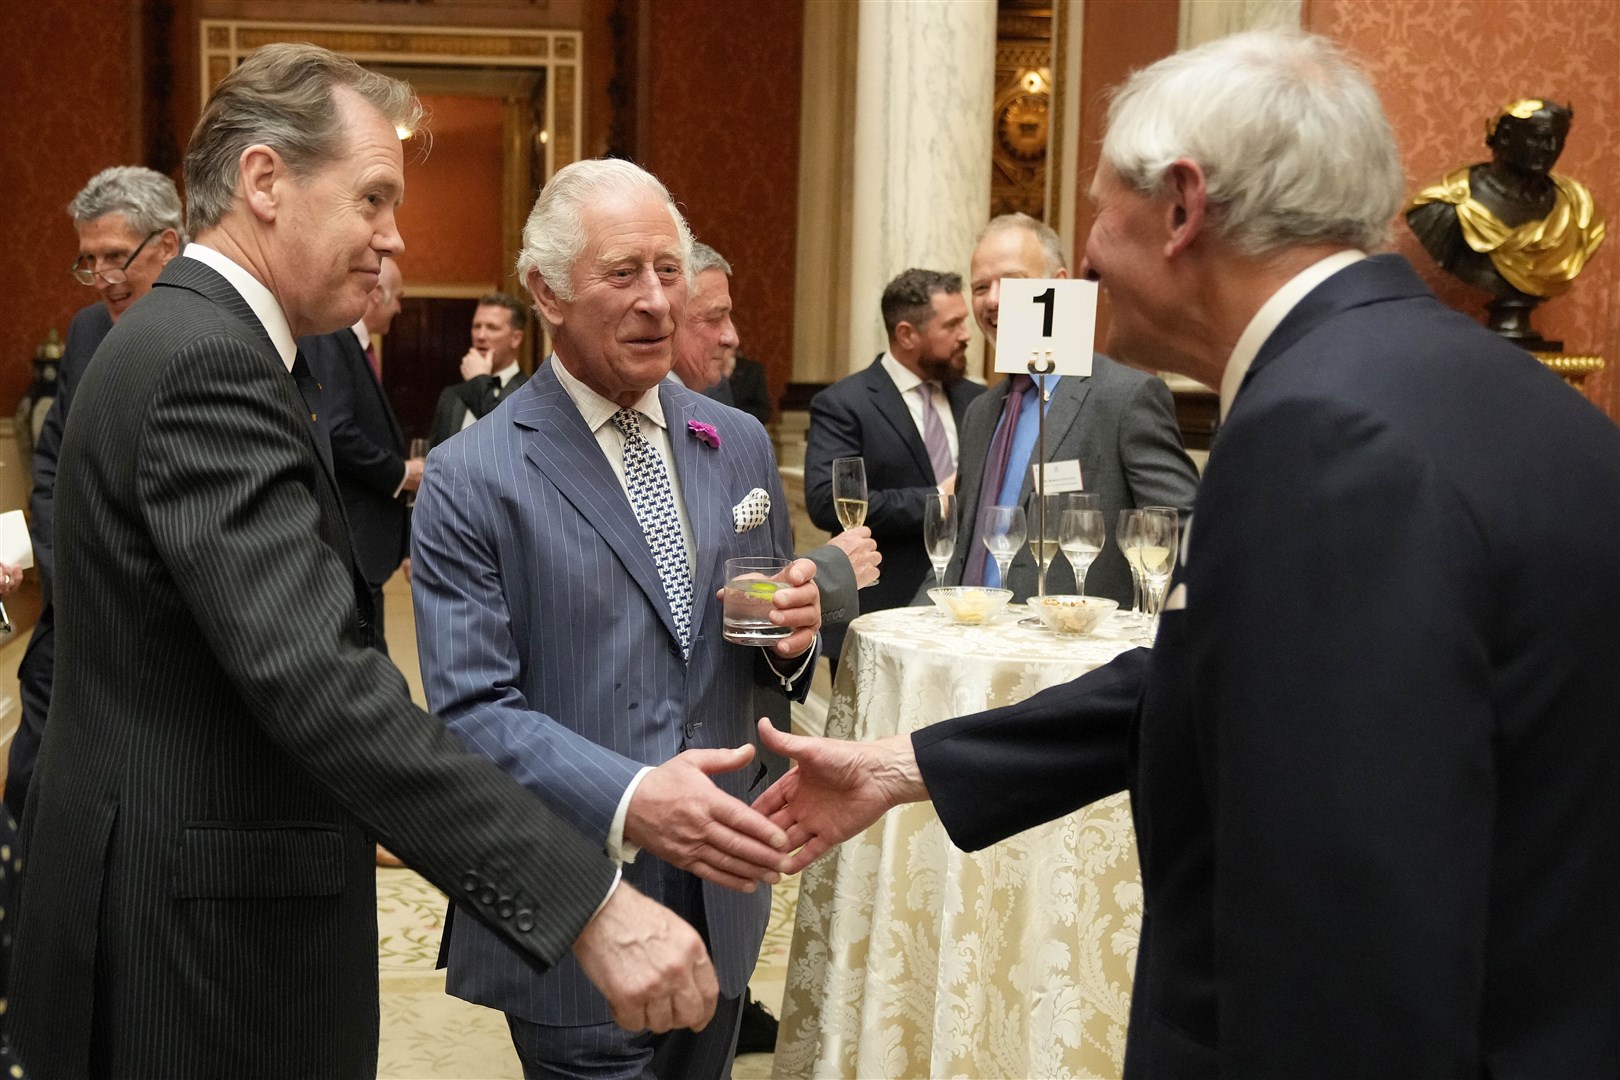 The Prince of Wales speaks to guests as he hosts a reception for recipients of The Queen’s Awards for Enterprise at Buckingham Palace (Frank Augstein/PA)